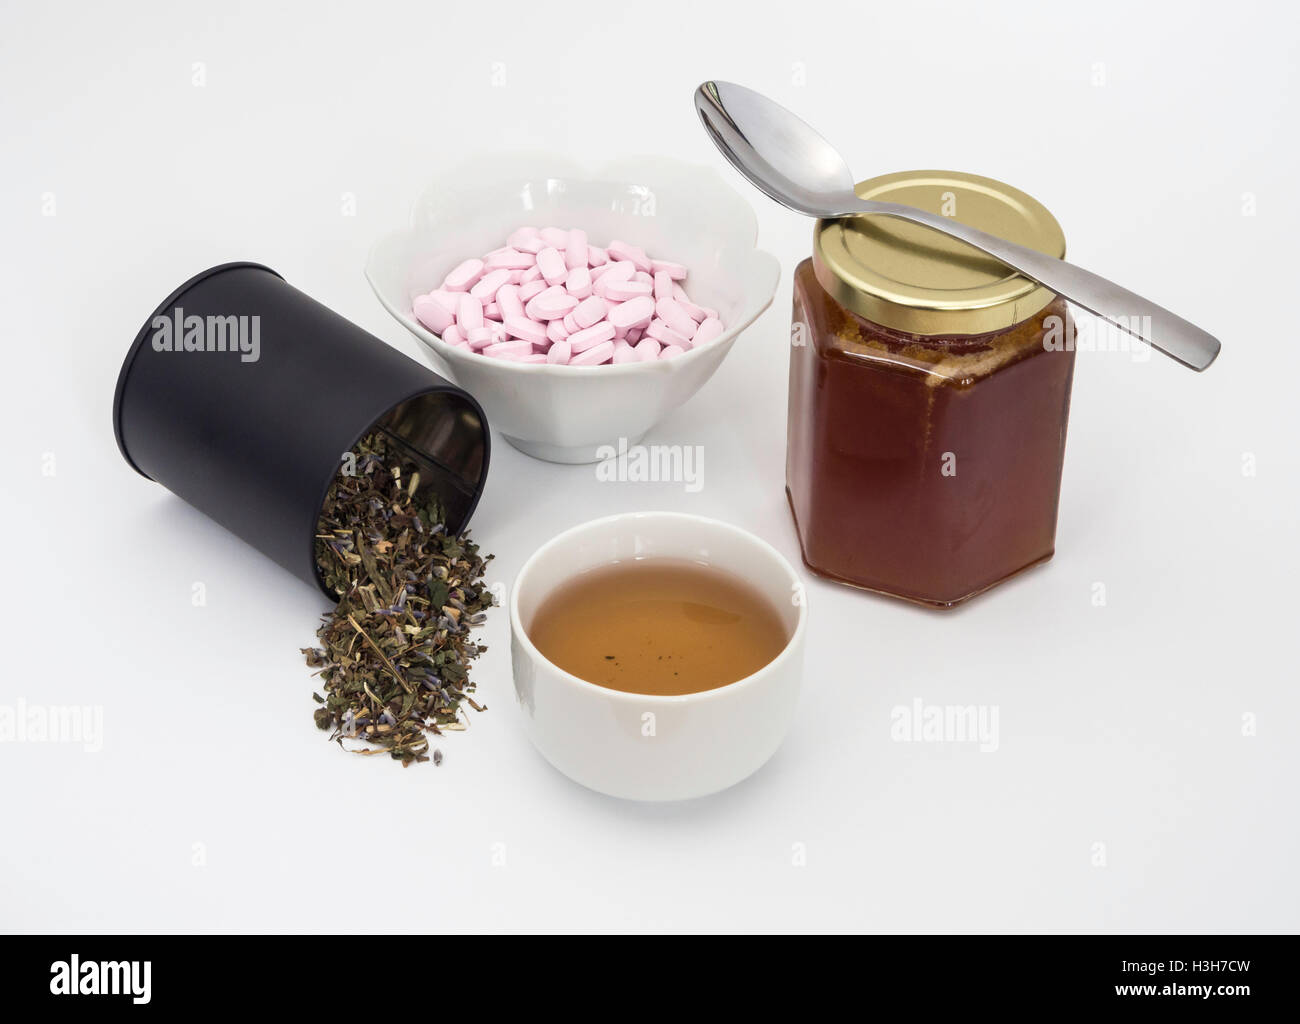 Green herb tulse with cup of tea, Vitamin B12 tablets and jar of chestnut honey, a combined remedy for cold and flu season. Stock Photo